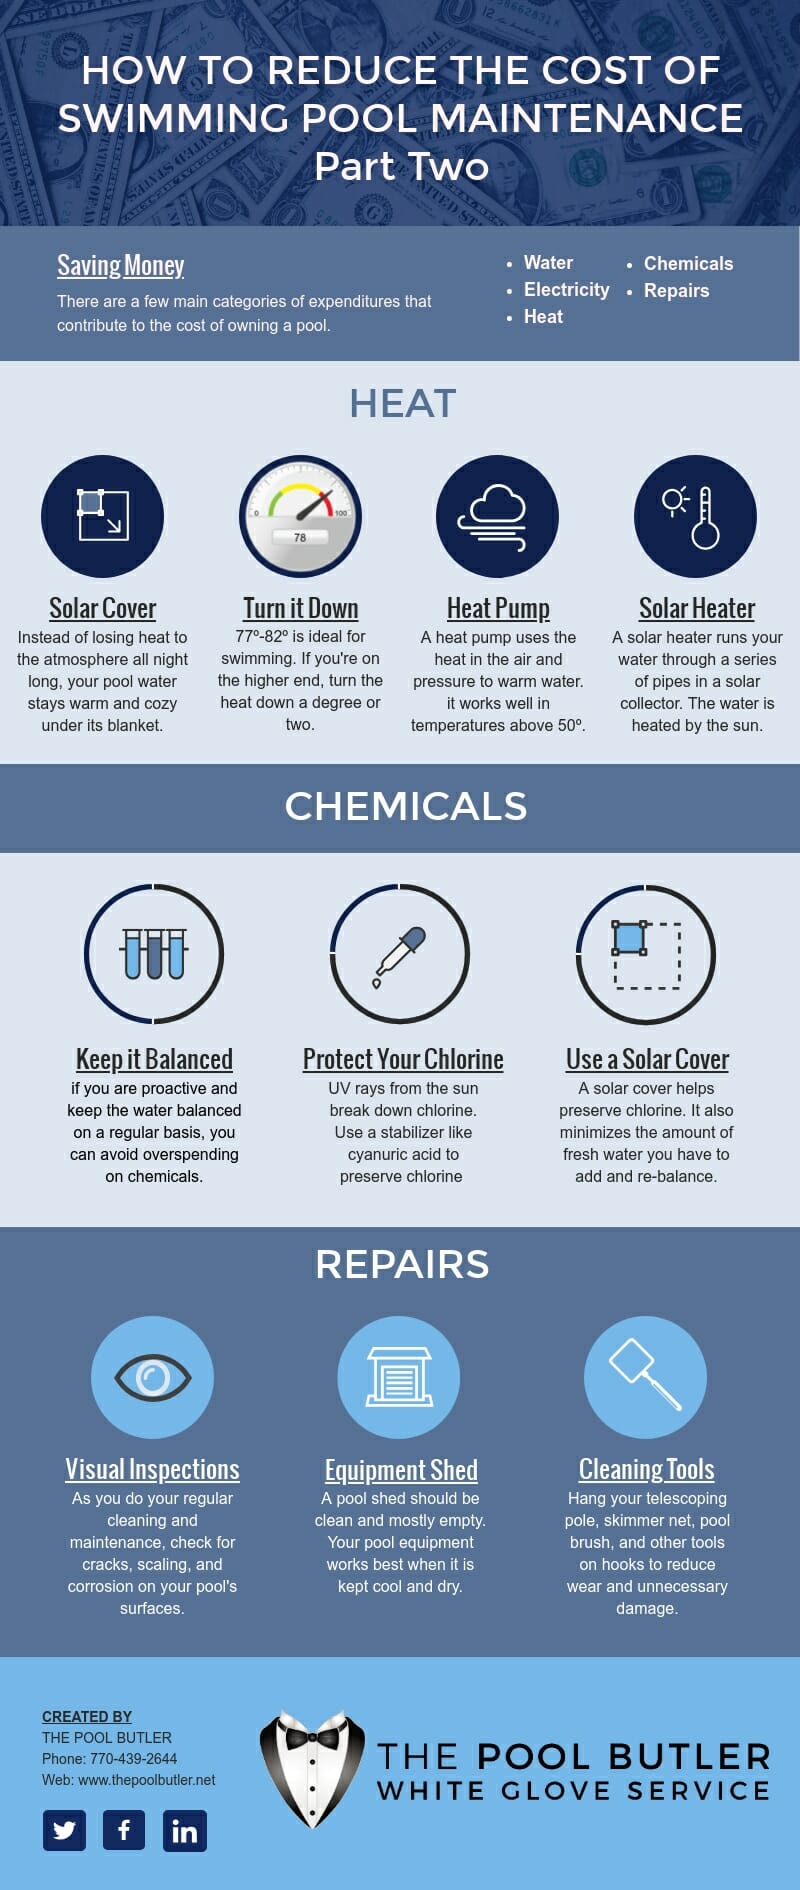 How to Reduce the Cost of Swimming Pool Maintenance - Part Two [infographic]